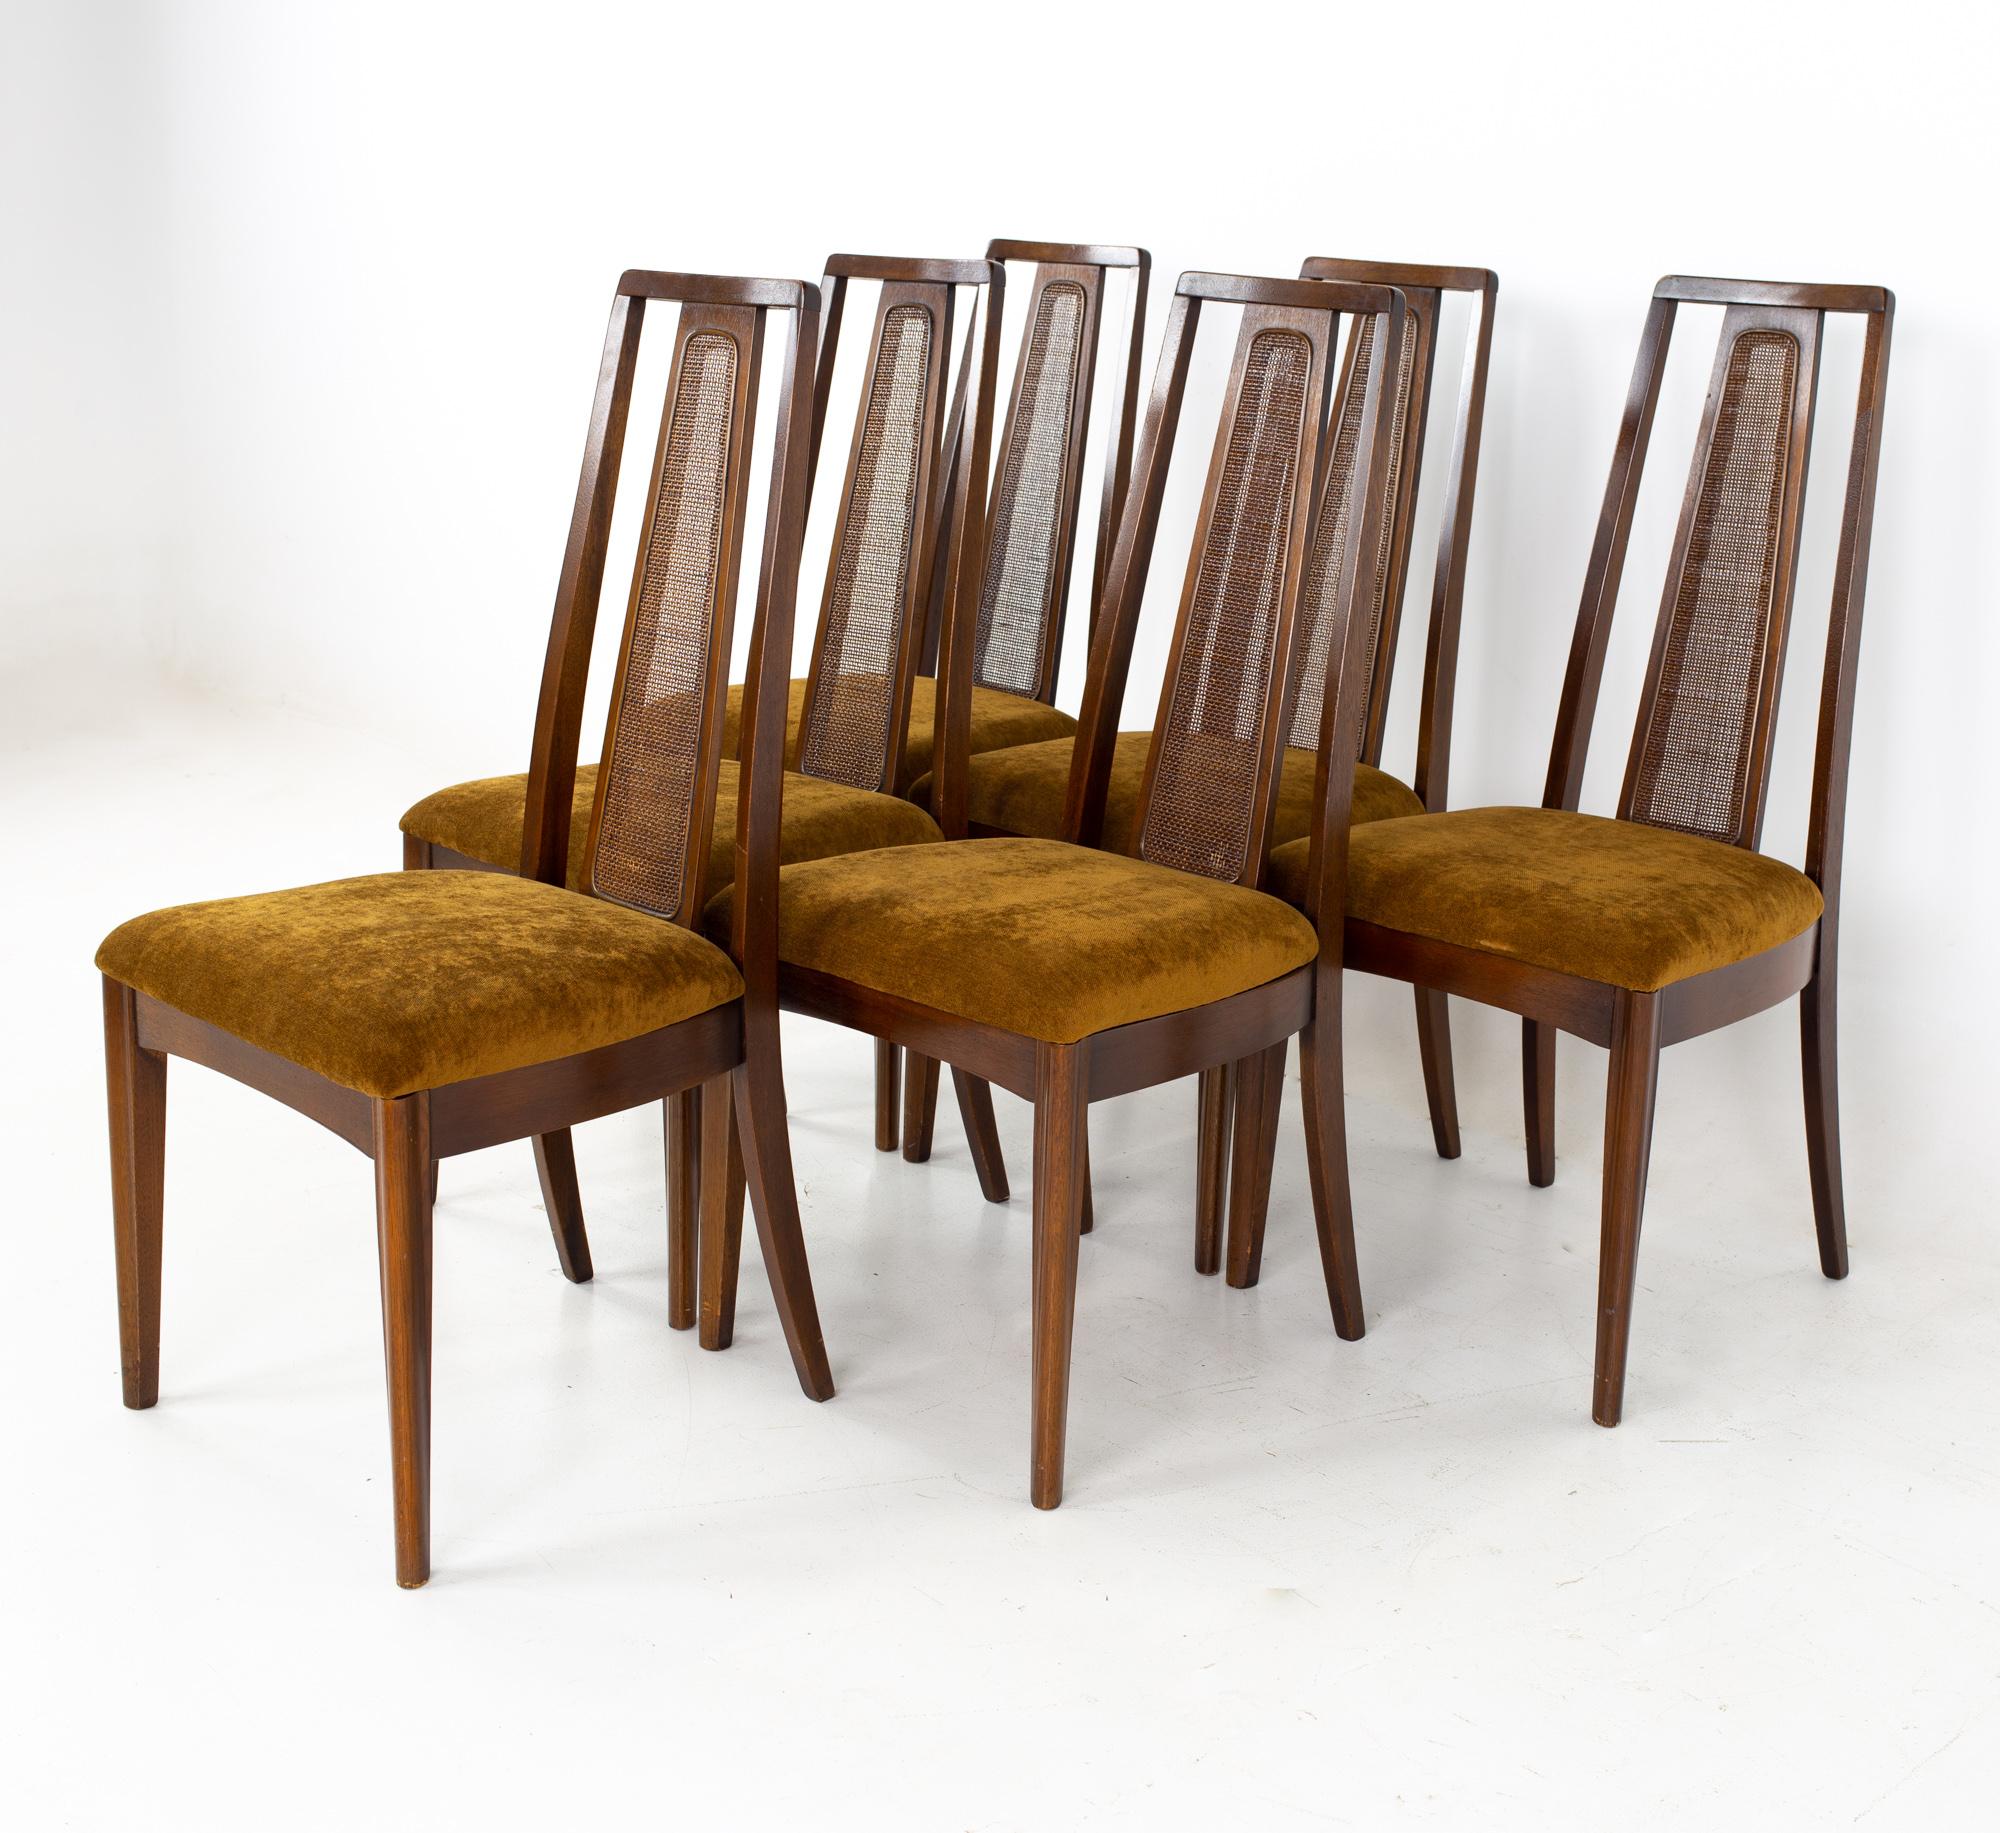 Broyhill emphasis mid century walnut and cane highback dining chairs - set of 6.
Each chair measures: 20 wide x 18 deep x 41.5 high, with a seat height of 18.5 inches

All pieces of furniture can be had in what we call restored vintage condition.